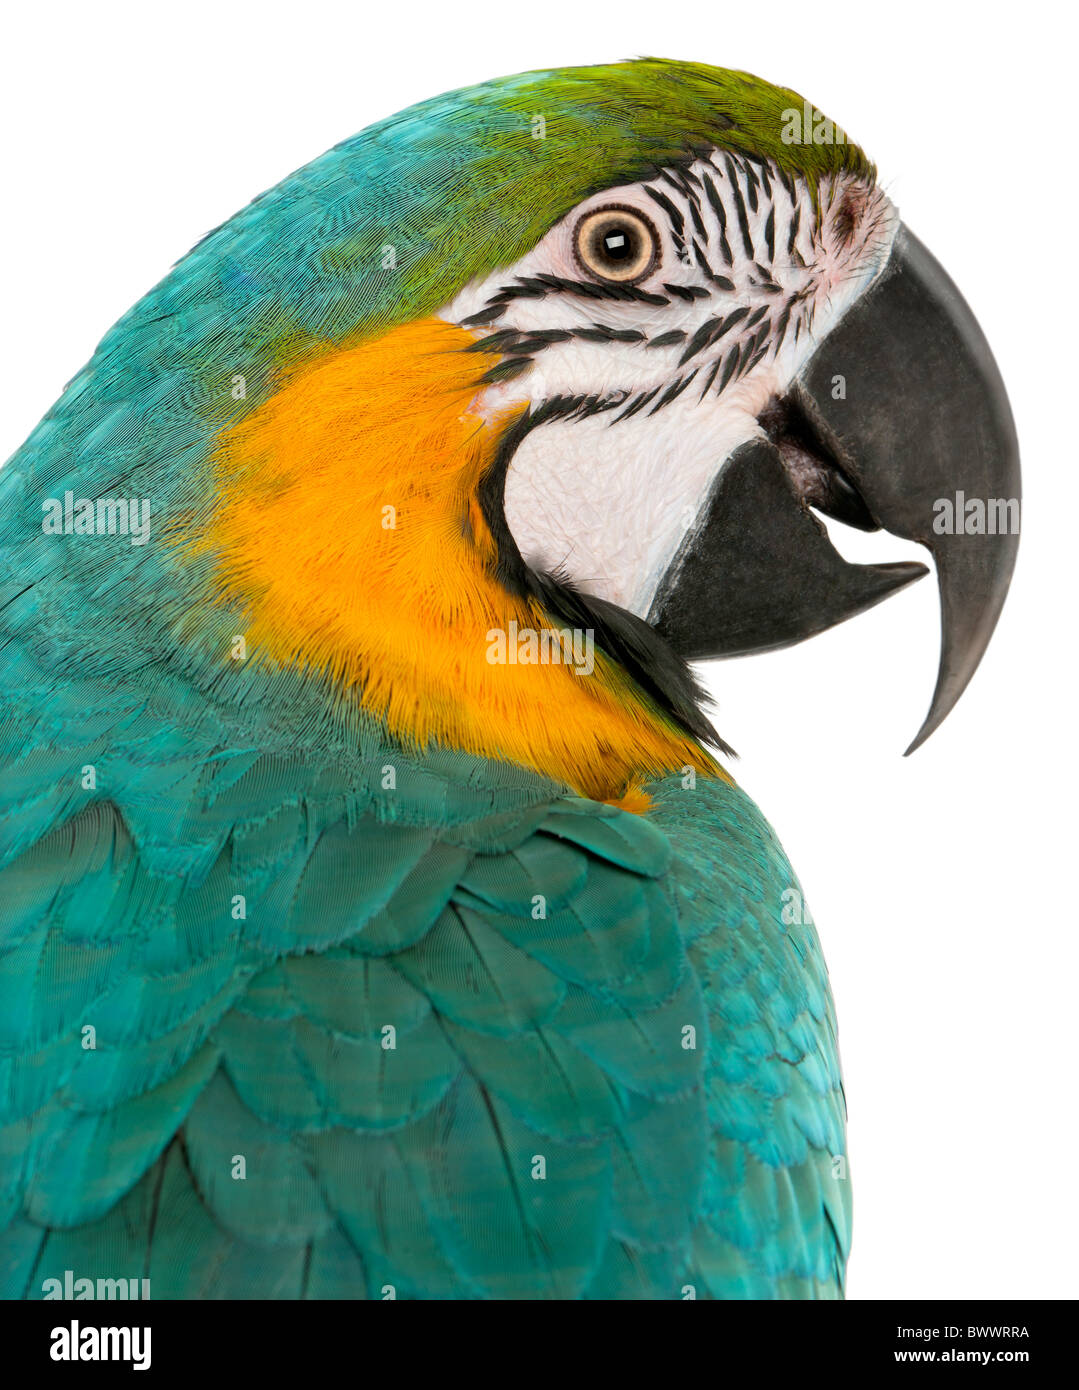 Close-up of Blue and Yellow Macaw, Ara Ararauna, in front of white background Stock Photo